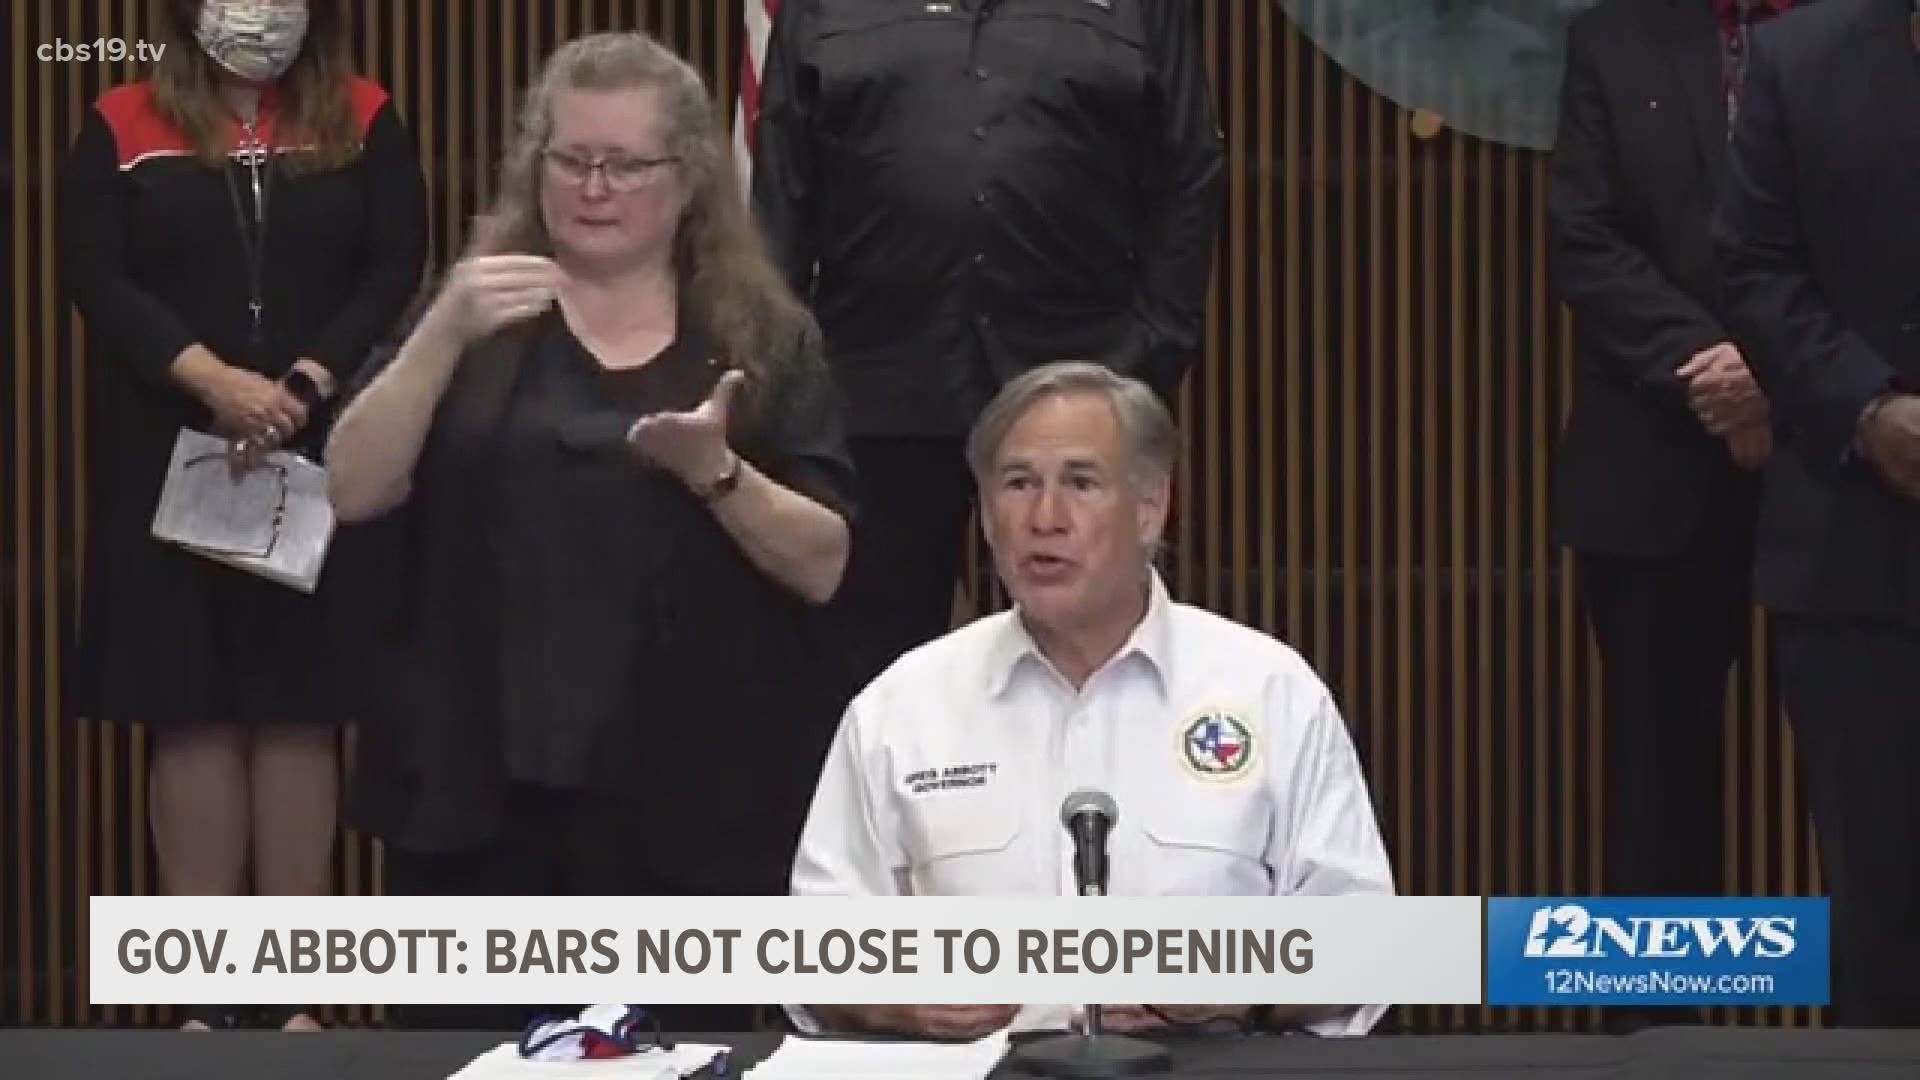 Gov. Abbott said the positivity rate would have to fall by more than half before he would be comfortable allowing bars to reopen.